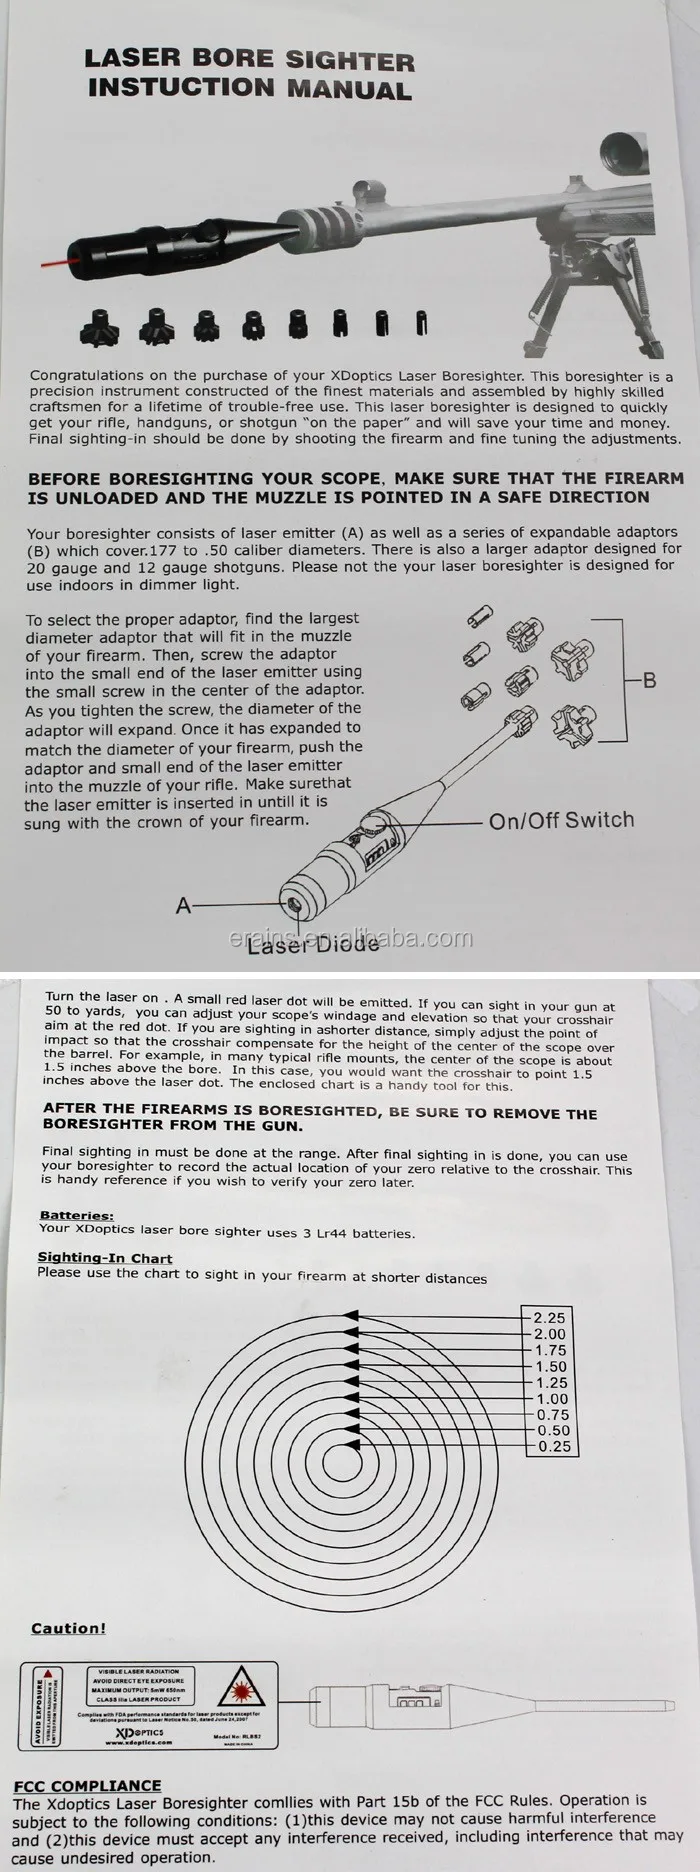 user manual sheet of the LSBS-05XDR red laser bore sighter.jpg